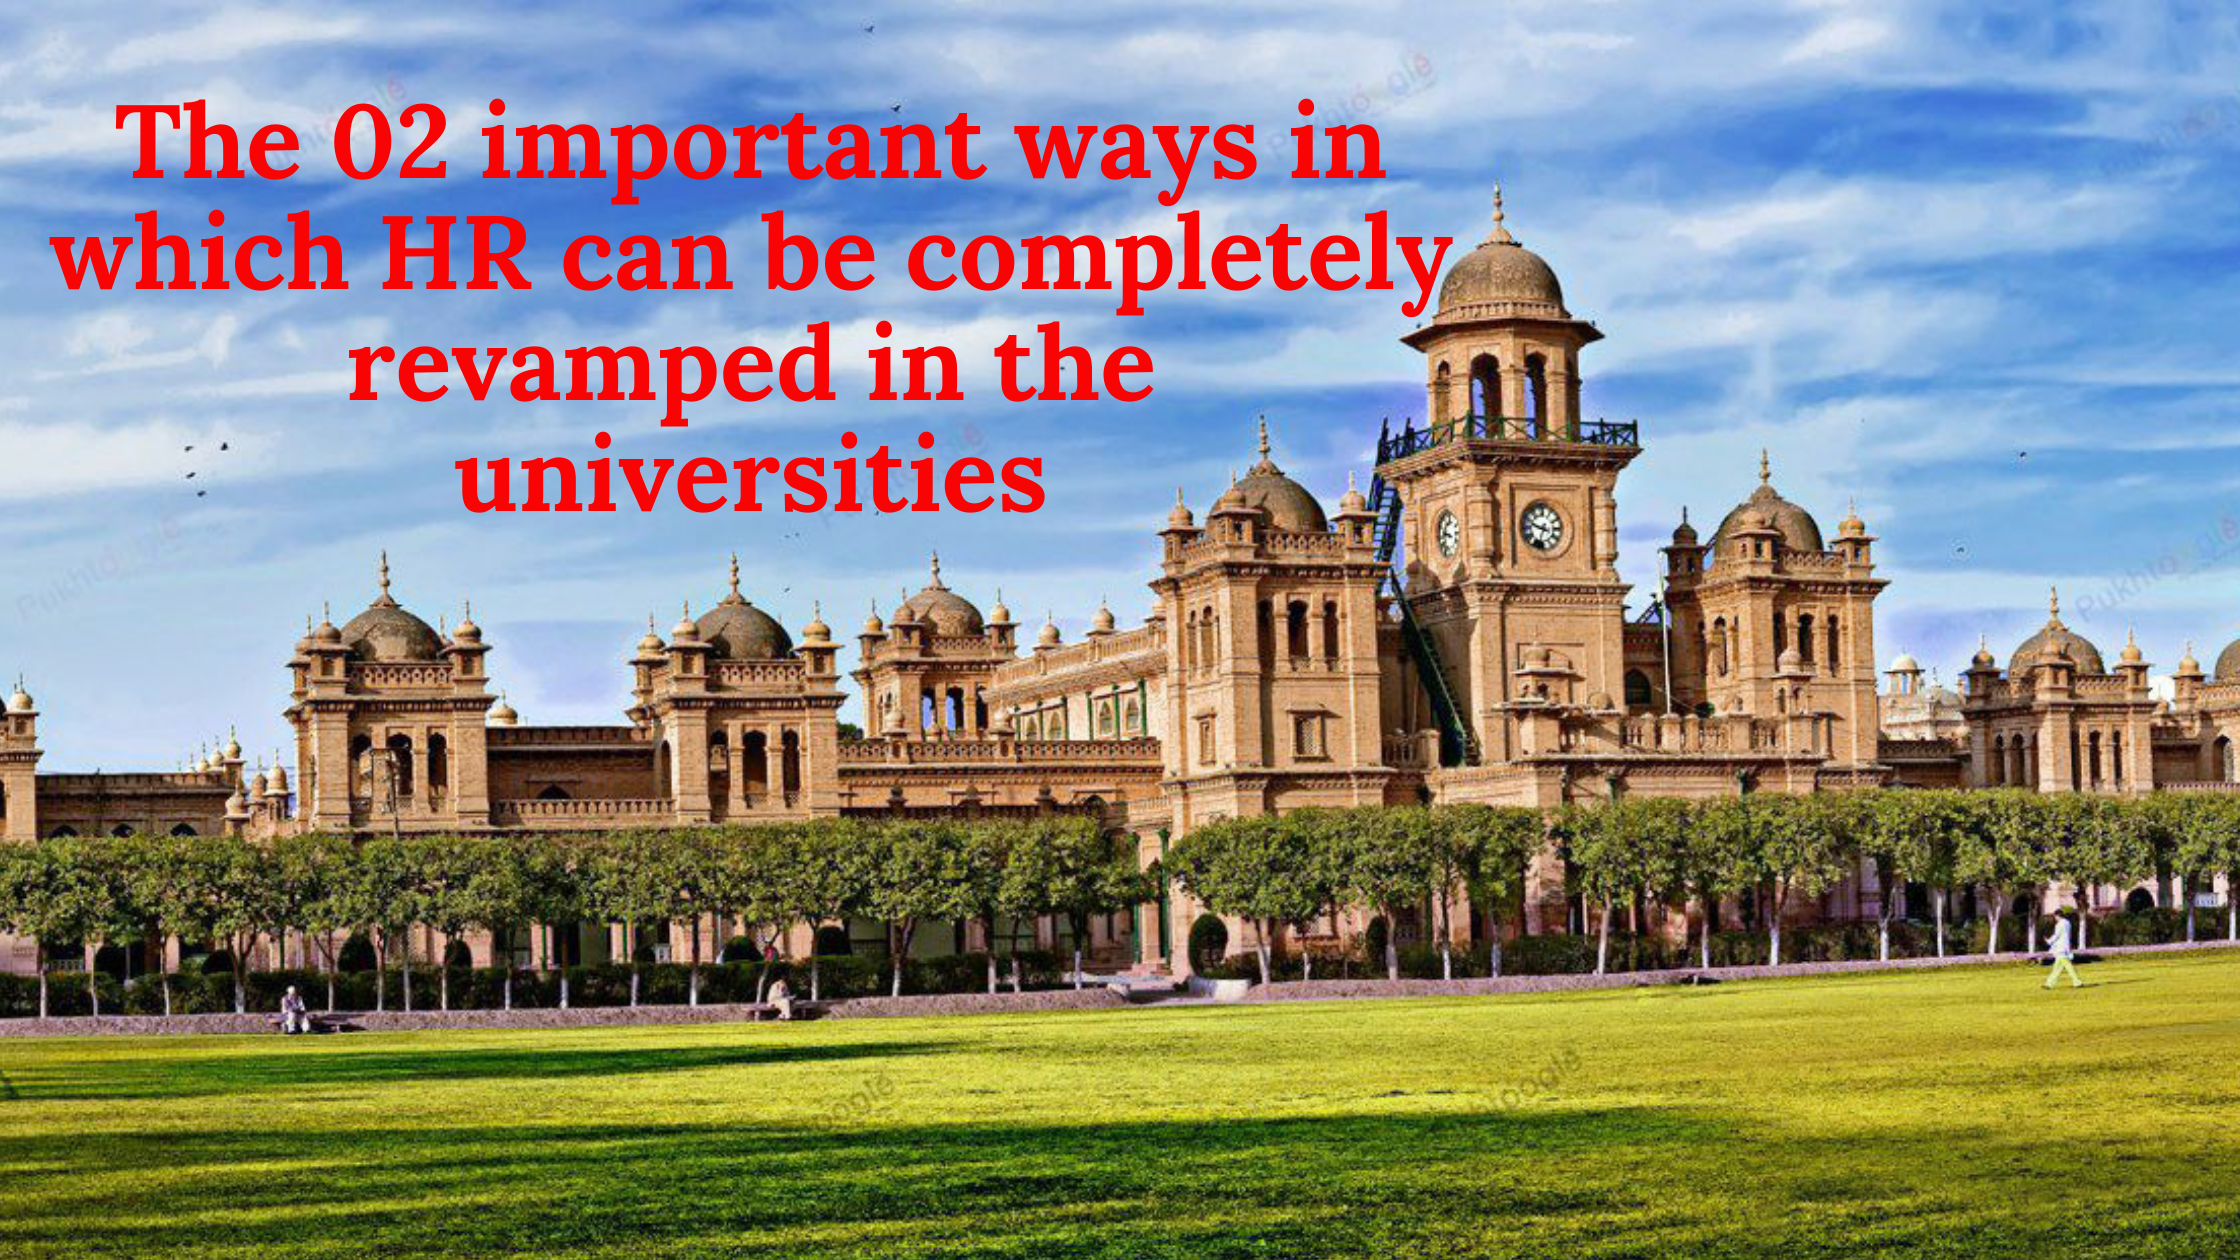 The 02 important ways in which HR can be completely revamped in the universities